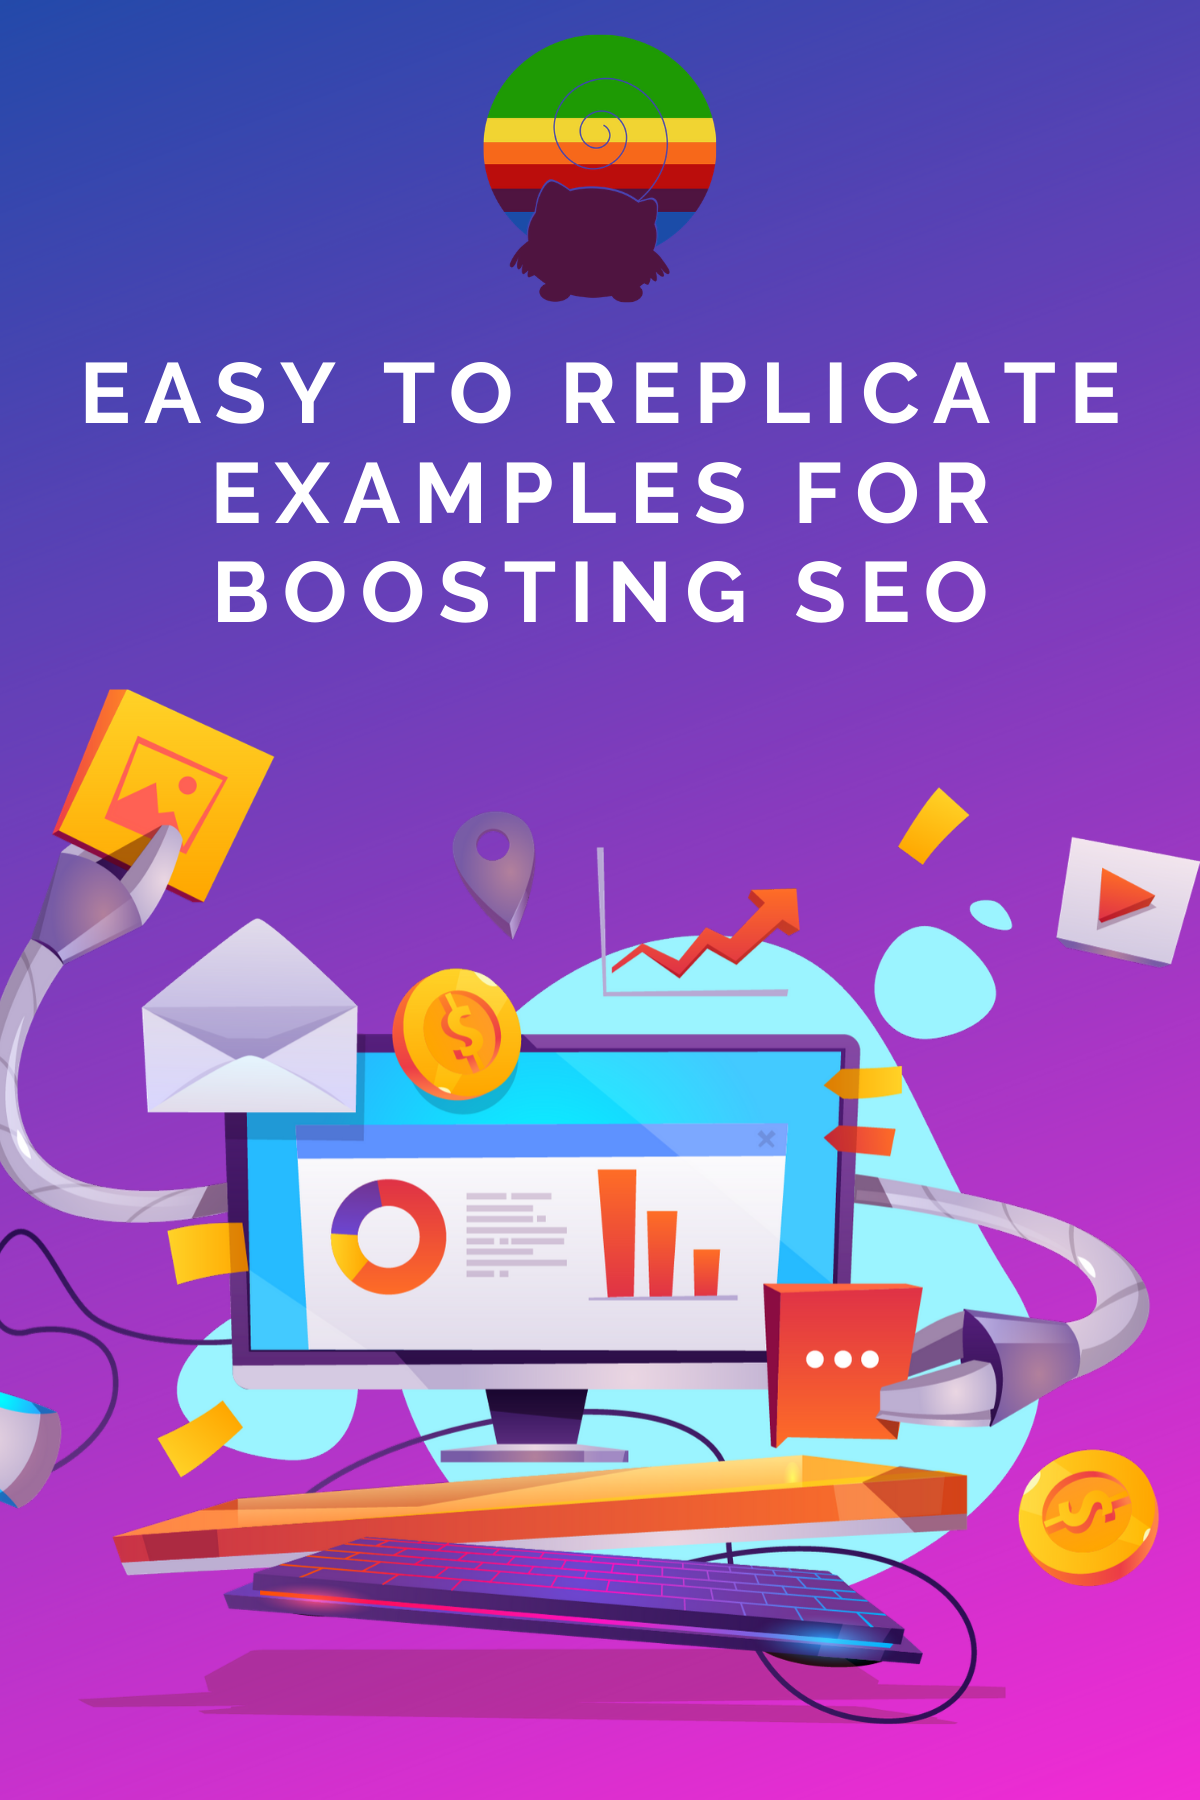 Easy to Replicate Examples of Boosting SEO